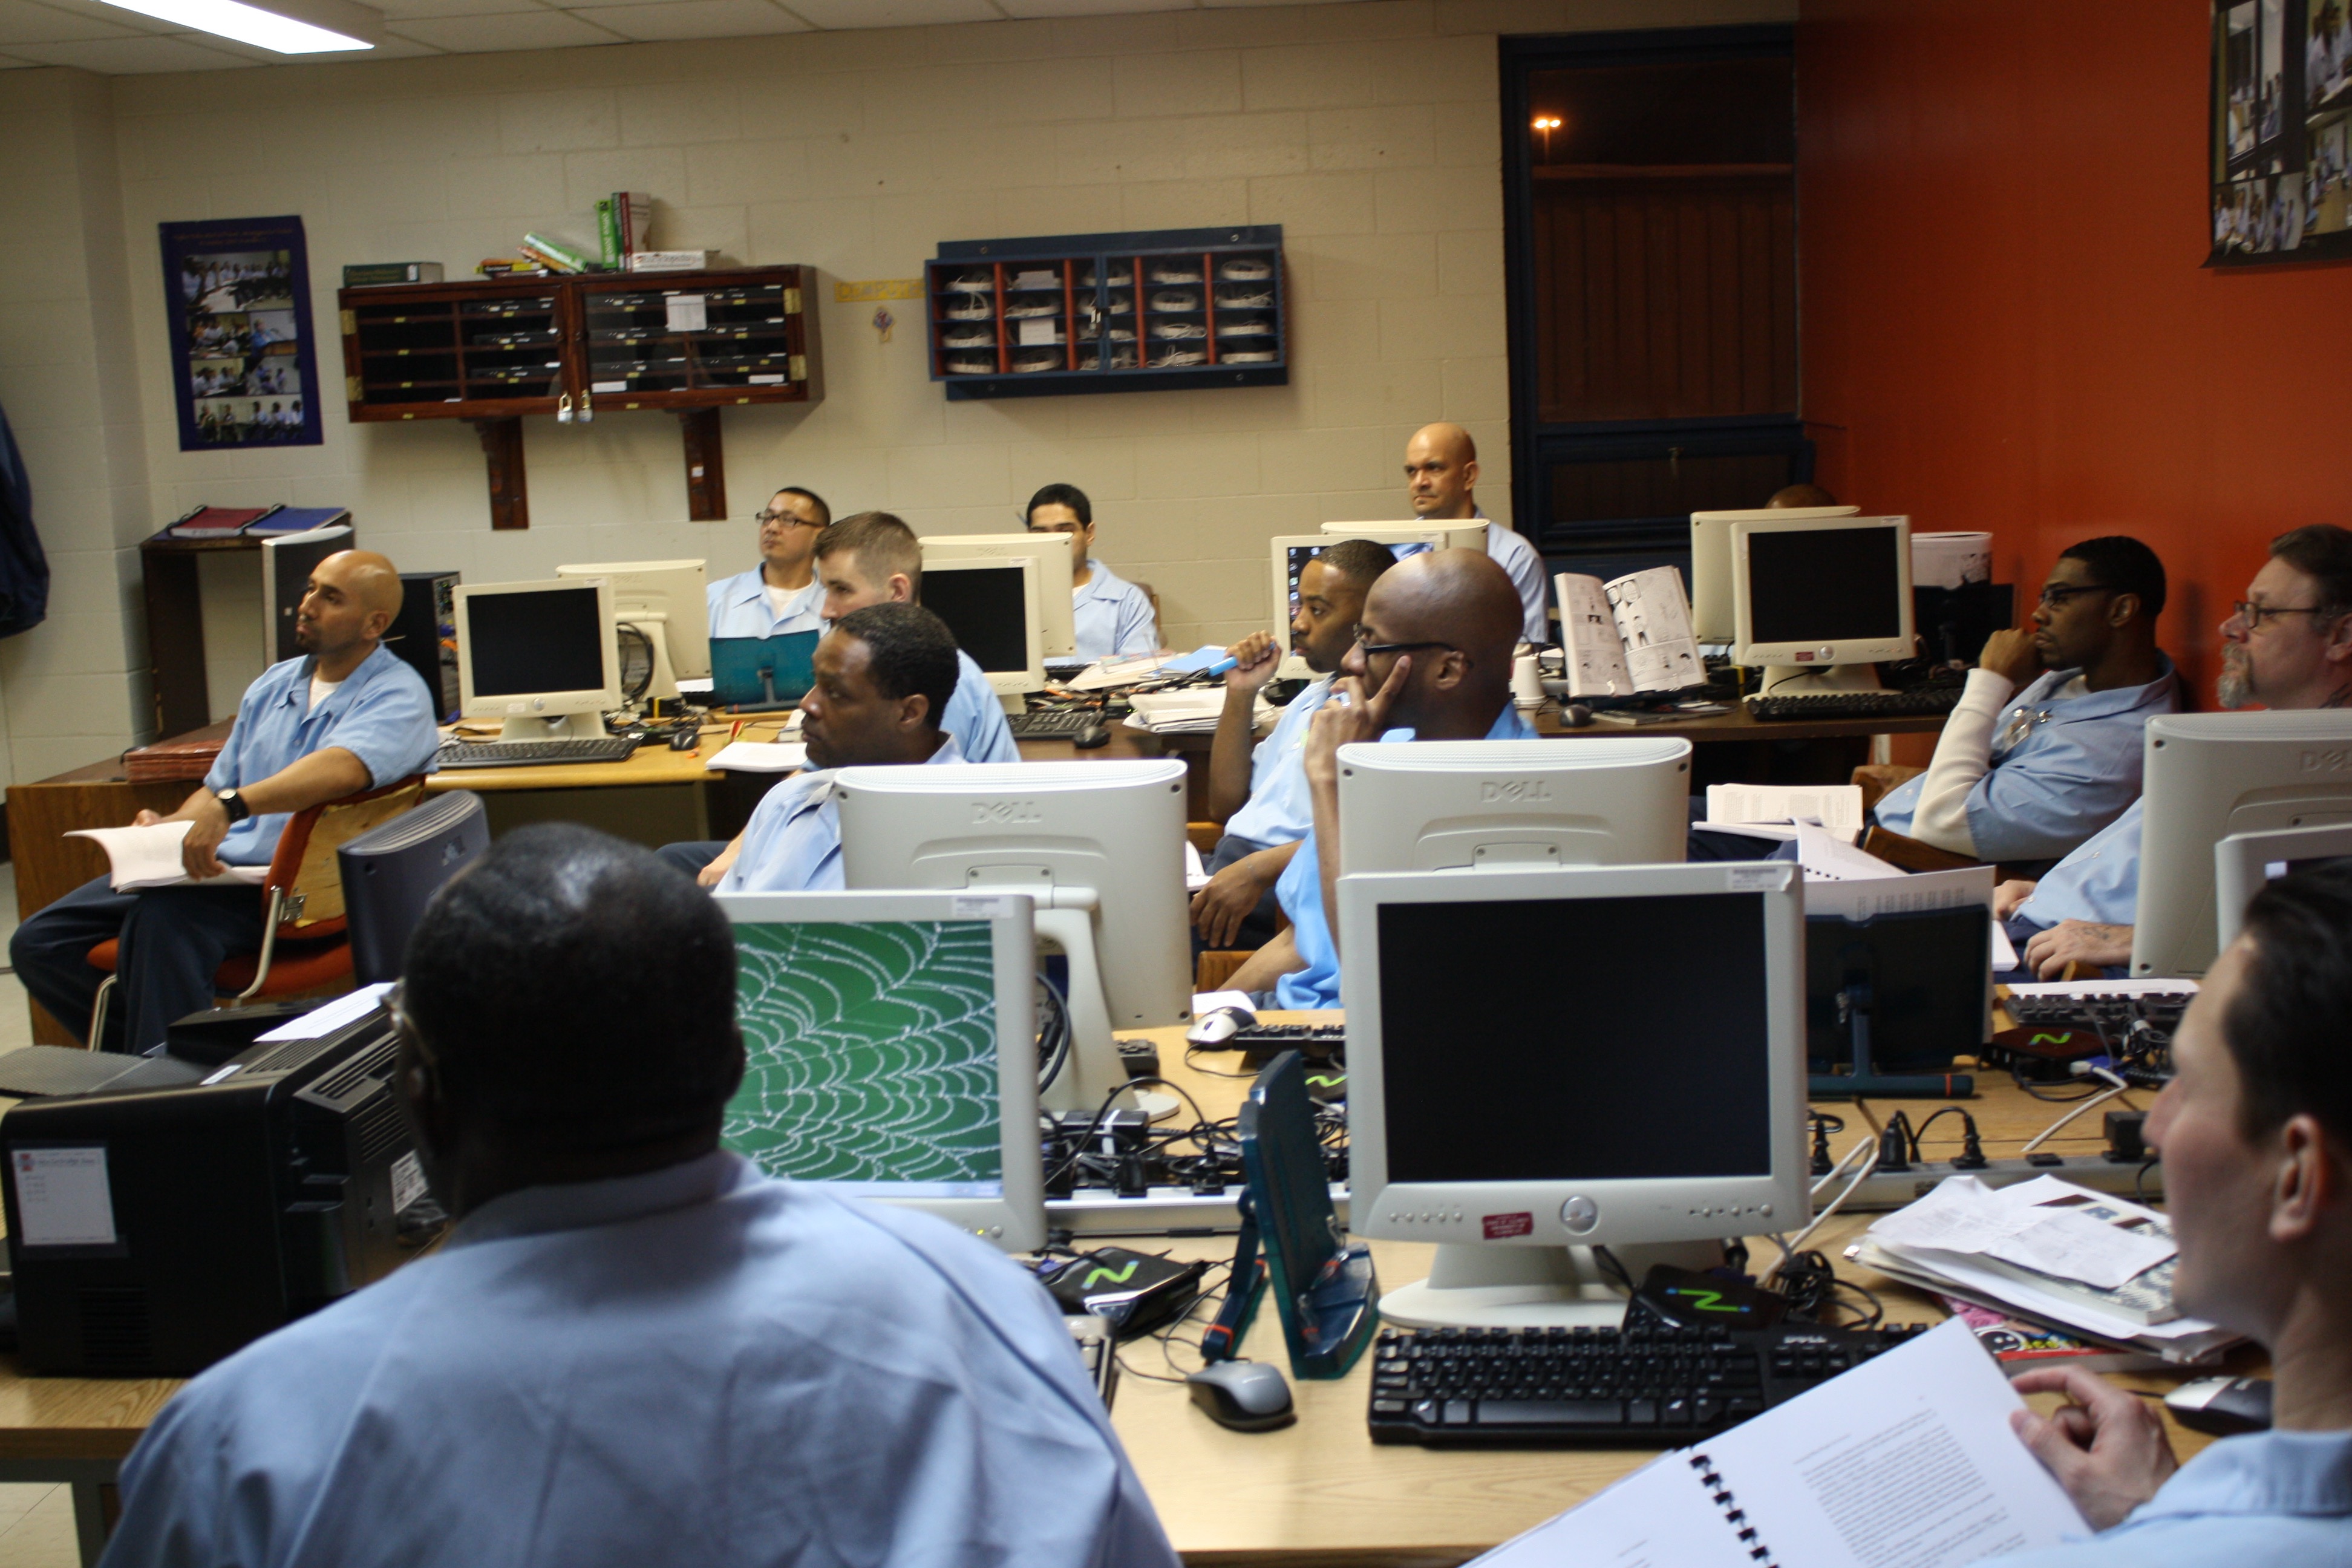 overview of prison classroom environment